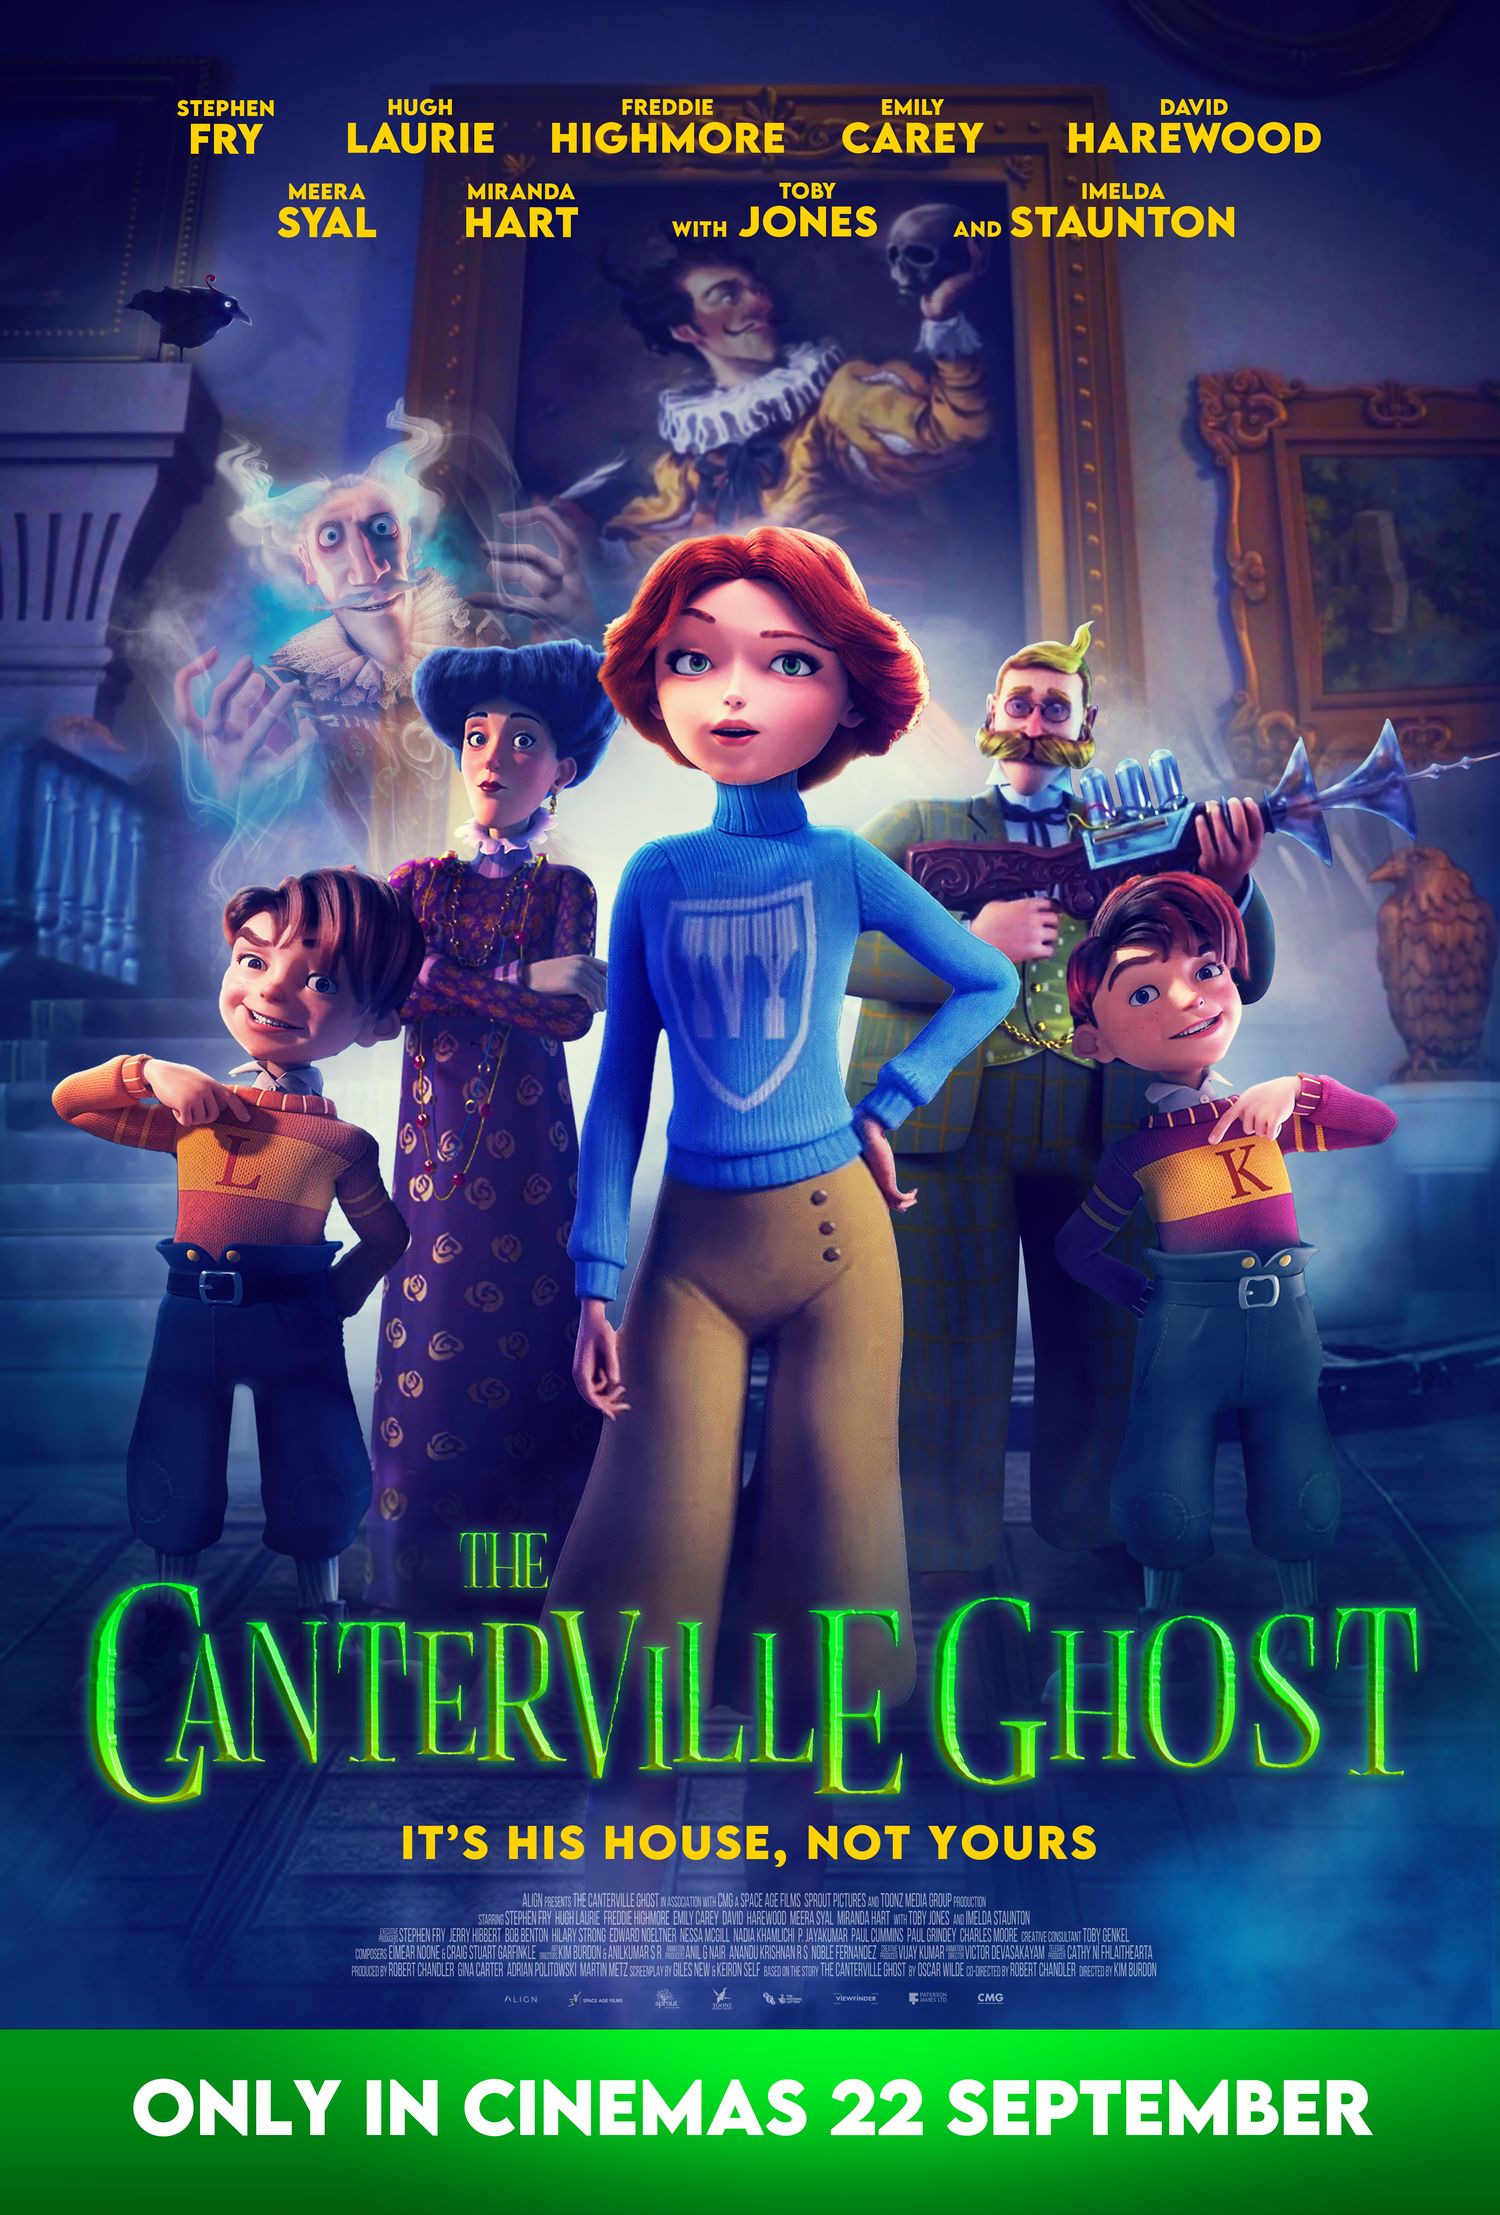 The Canterville Ghost UK Theatrical Poster (Signature Entertainment)_resize